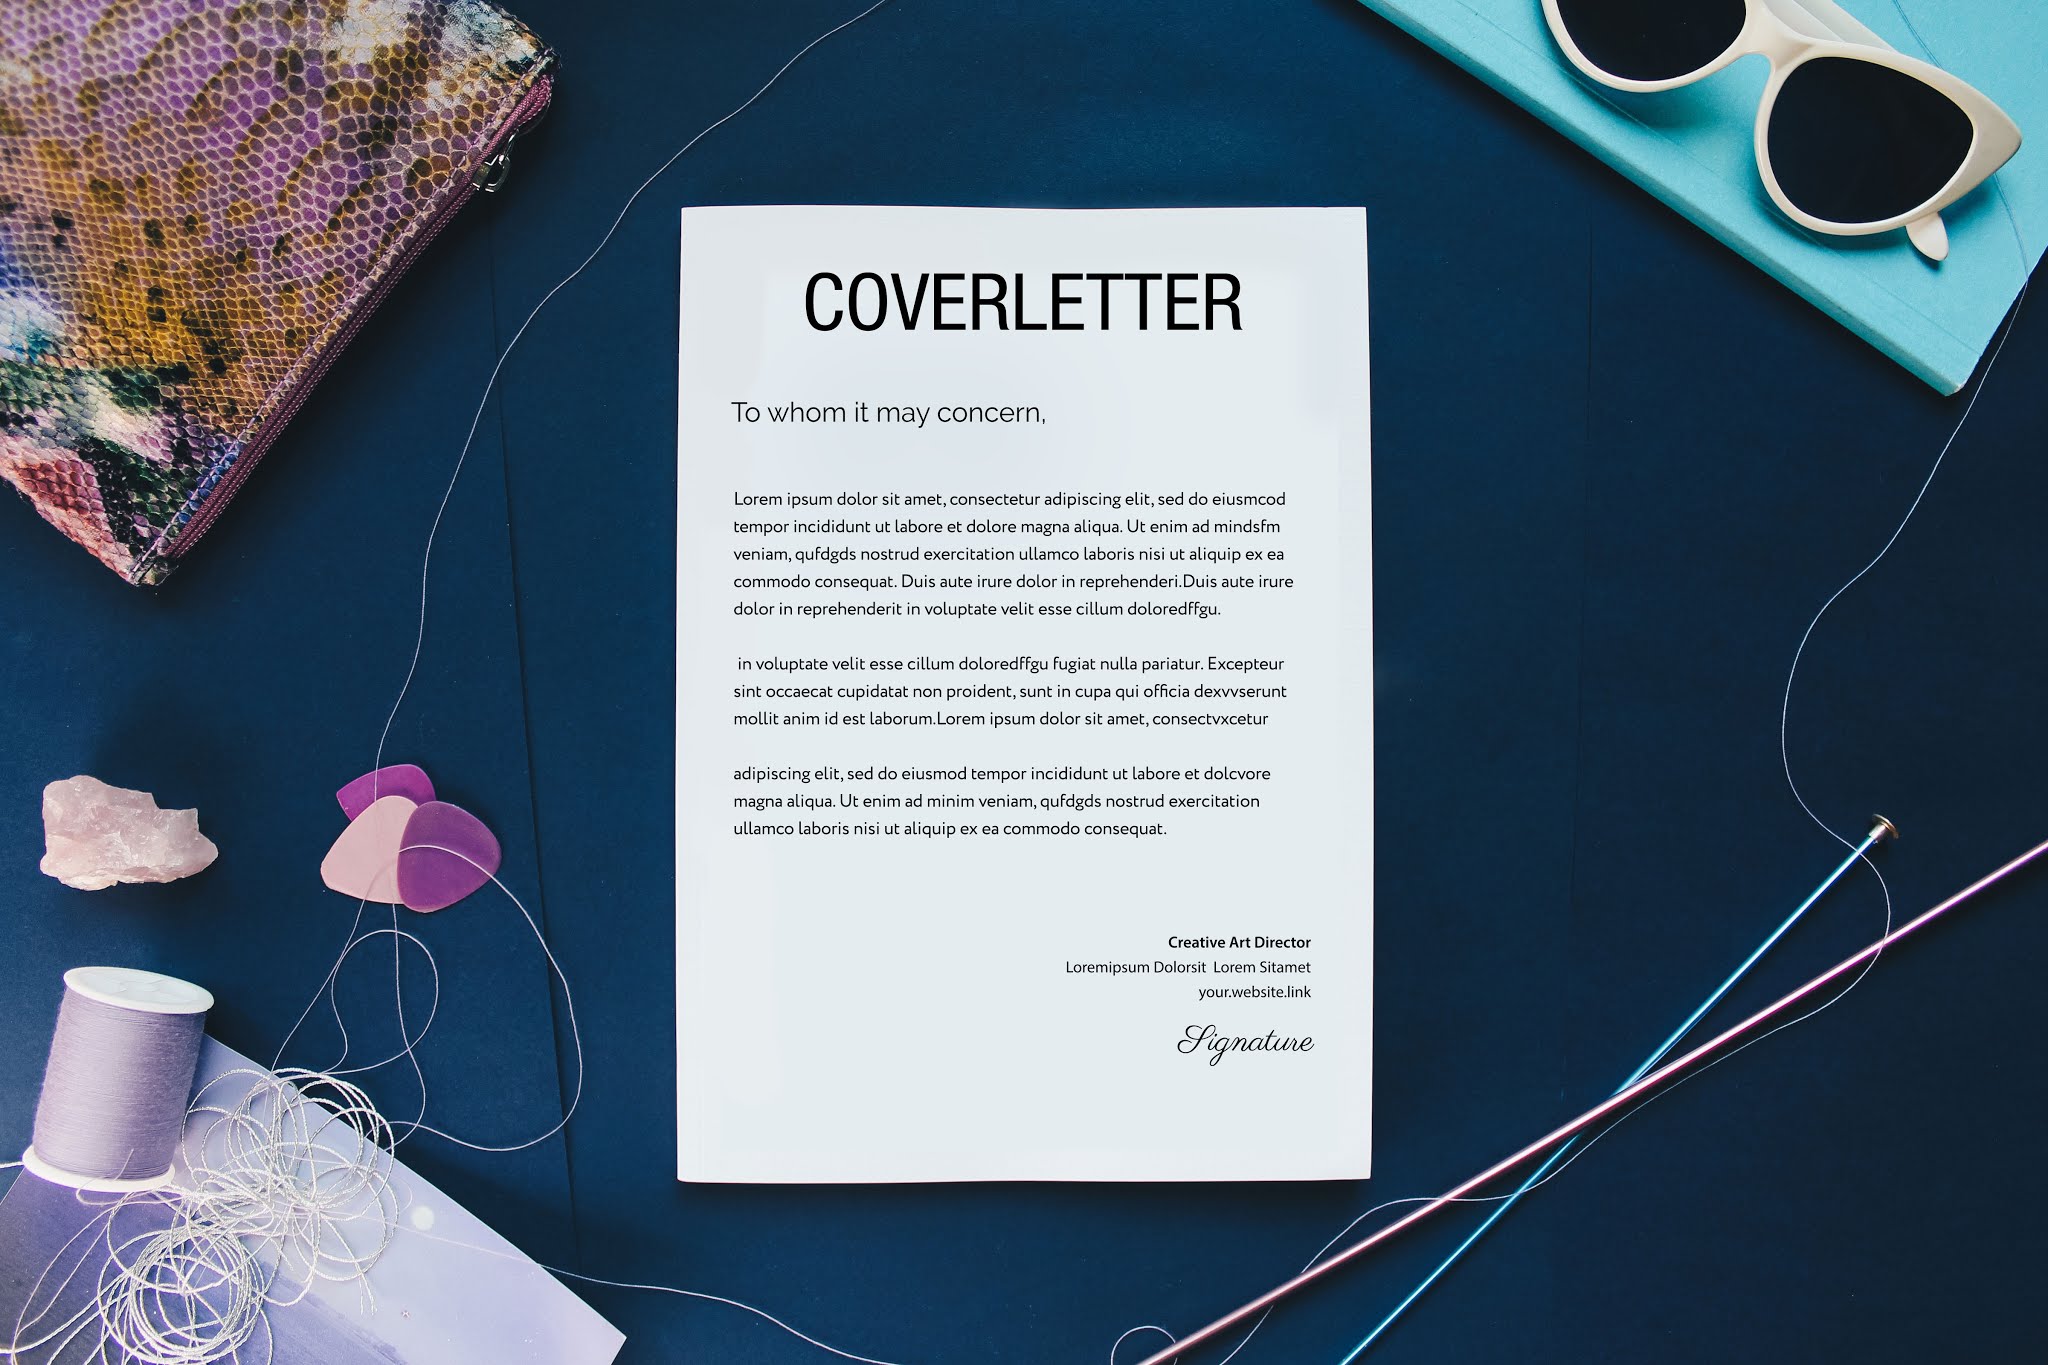 why cover letter is important